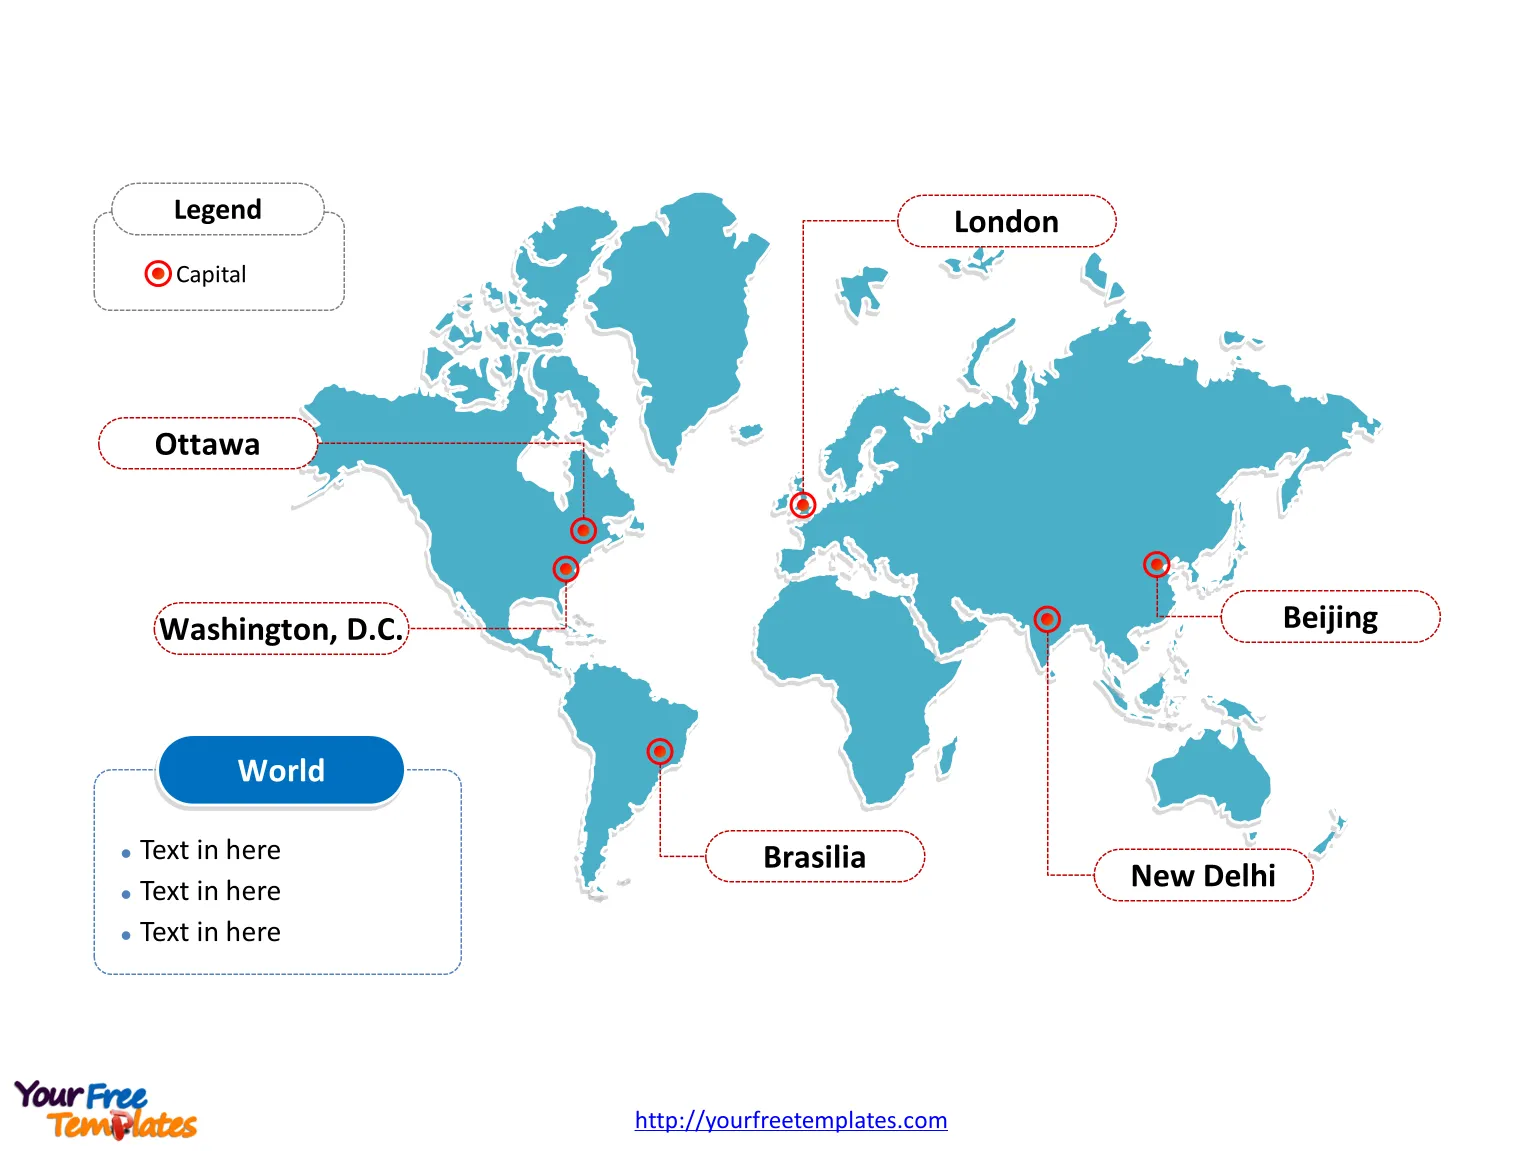 World Map free powerpoint templates Free PowerPoint Templates